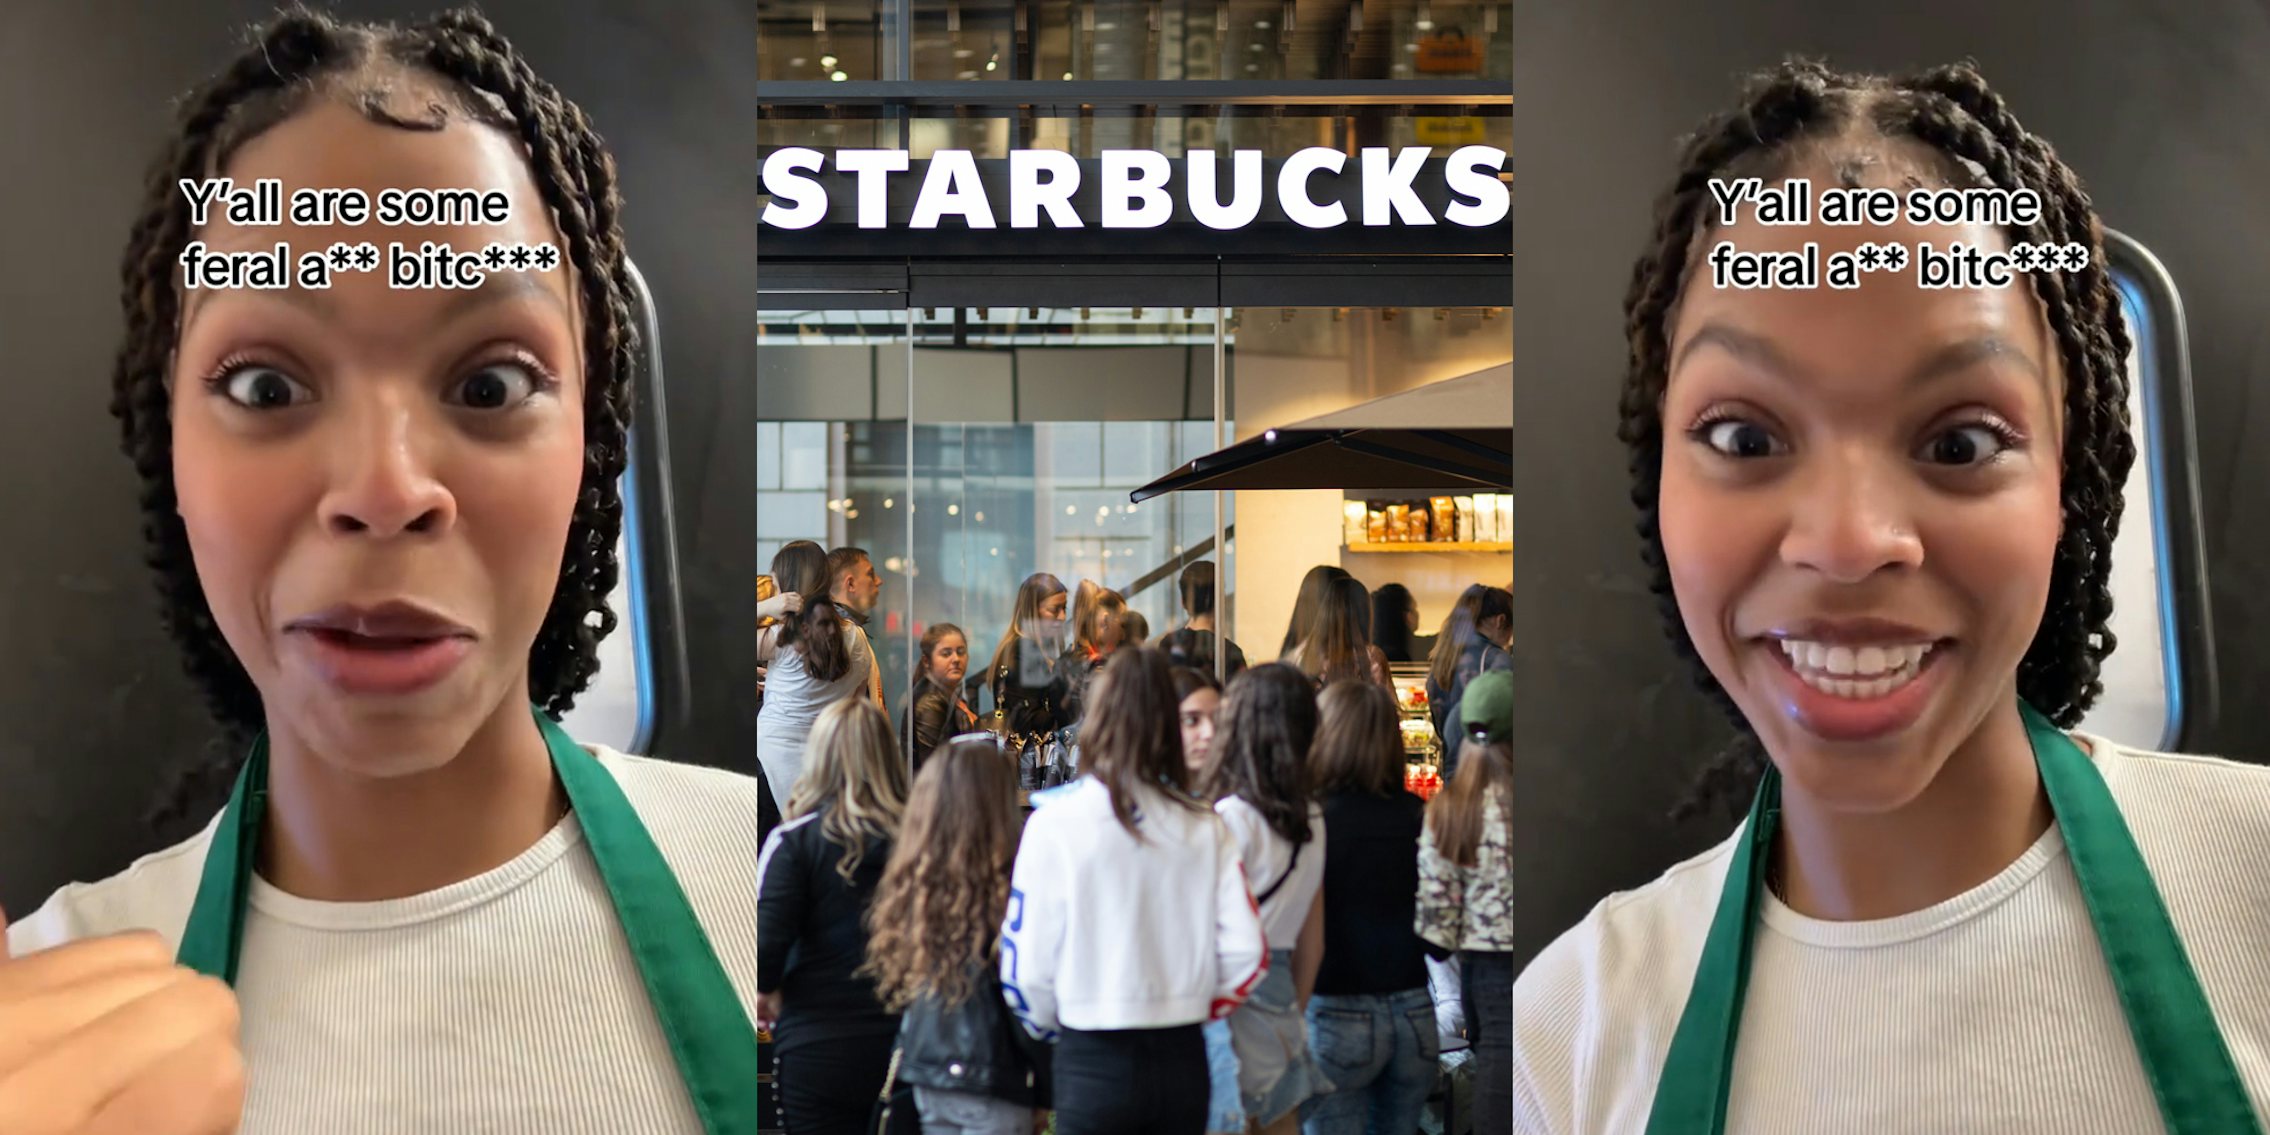 Starbucks barista speaking with caption 'Y'all are some feral a** bitc***' (l) Starbucks sign with line of people waiting to get in (c) Starbucks barista speaking with caption 'Y'all are some feral a** bitc***' (r)